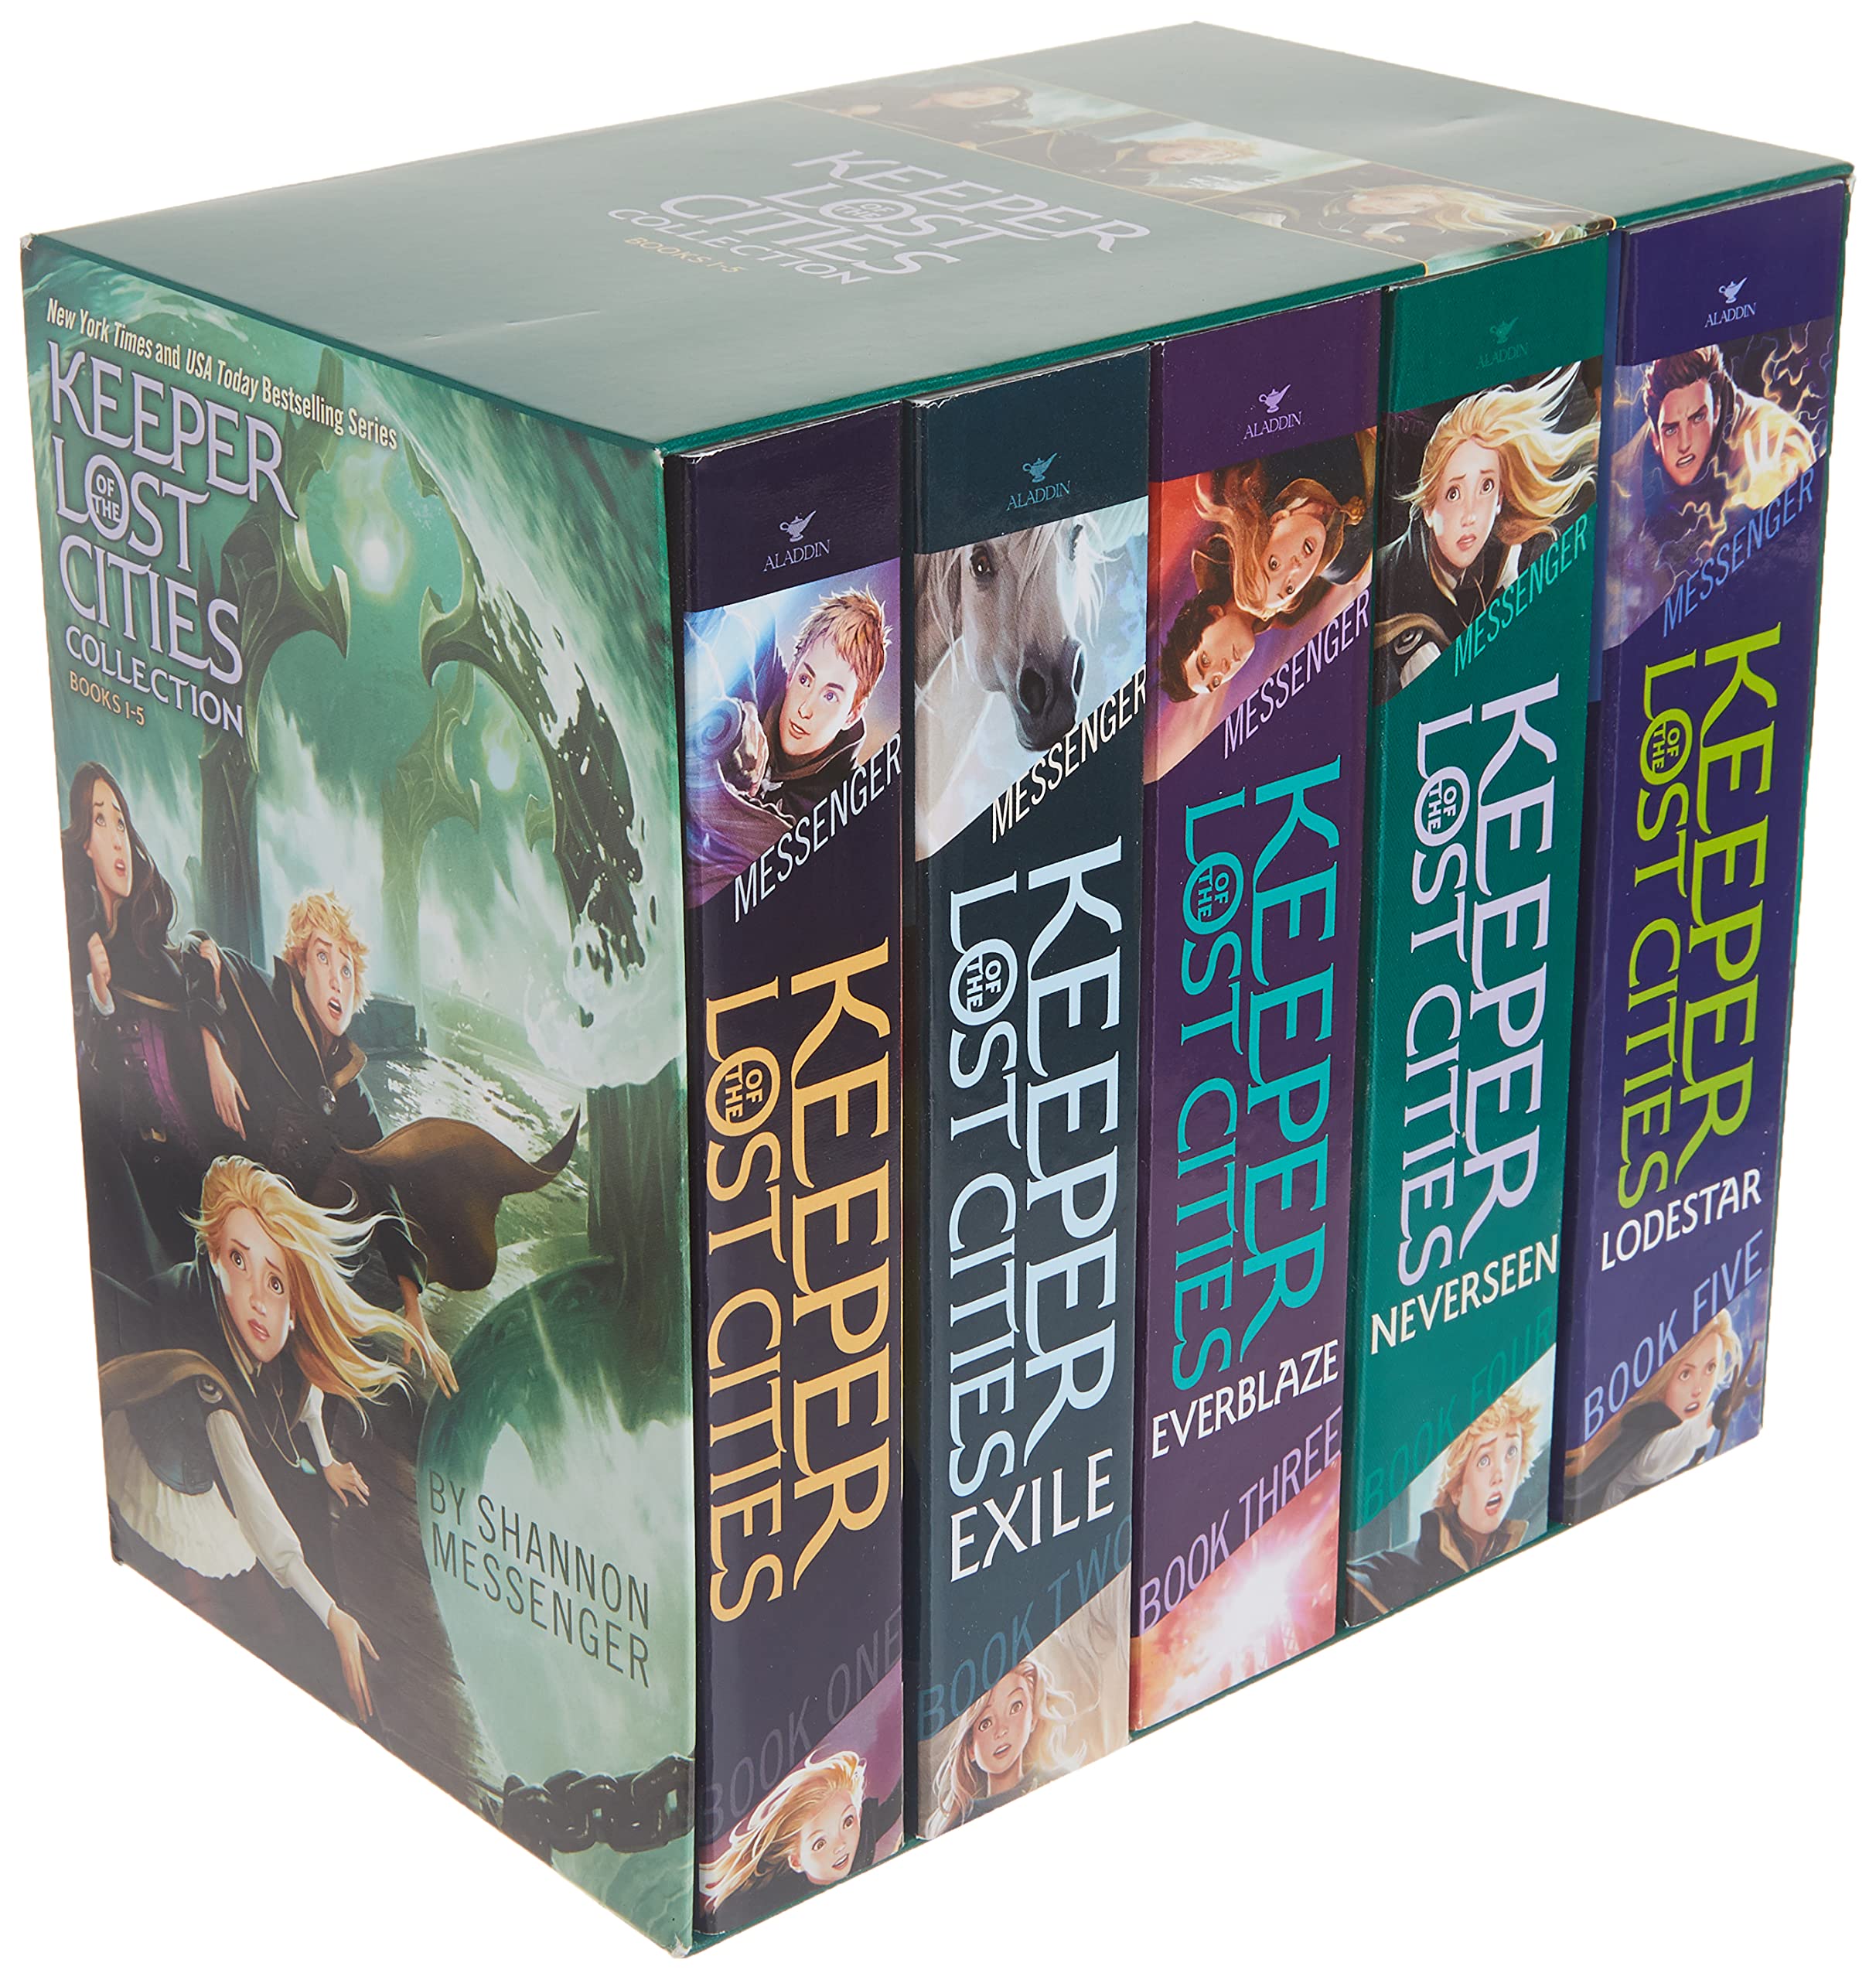 Keeper of the Lost Cities Collection Books 1-5 (Boxed Set): Keeper of the Lost Cities; Exile; Everblaze; Neverseen; Lodestar (Boxed Set)